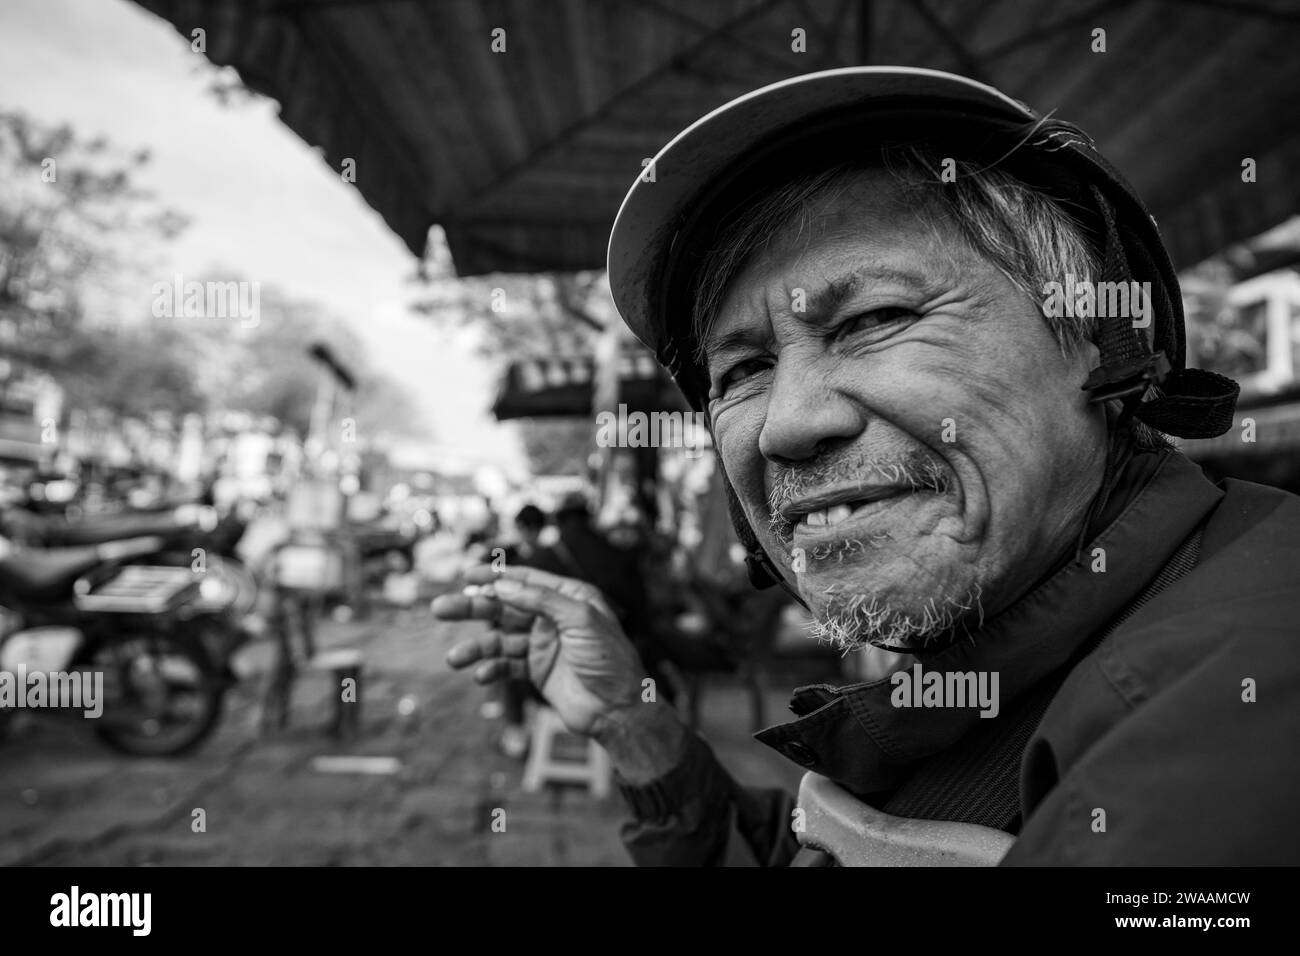 A man from Vietnam is smoking a cigarette Stock Photo